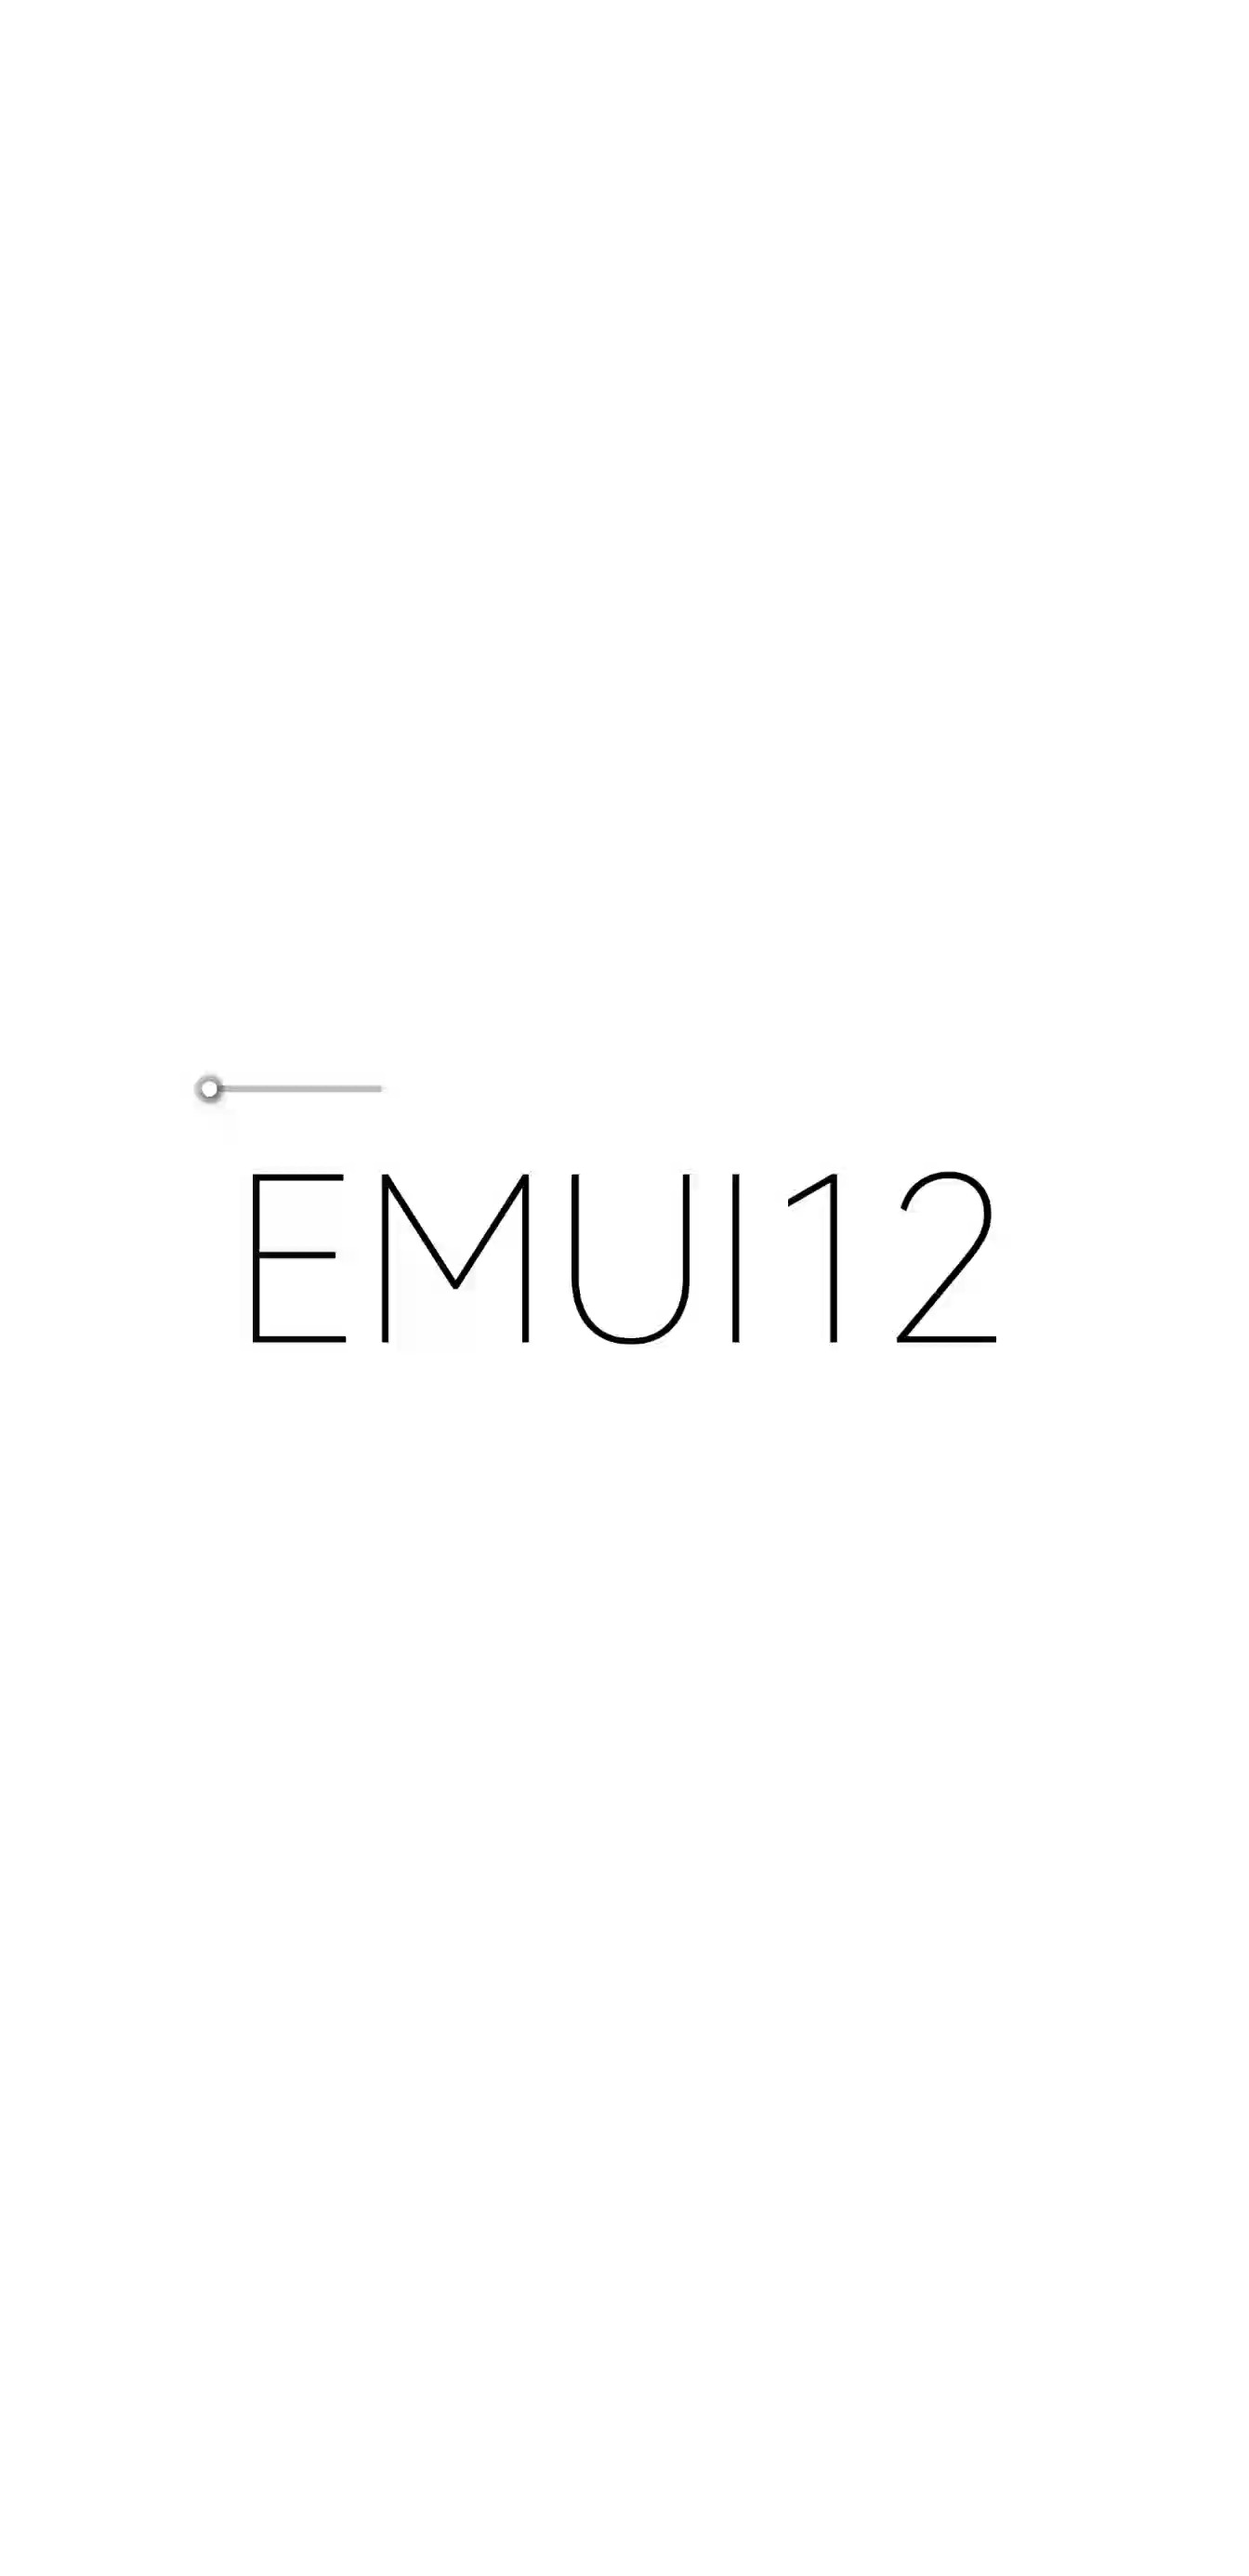 Genuine Call recorder for EMUI 10, 10.1, 11 or 12